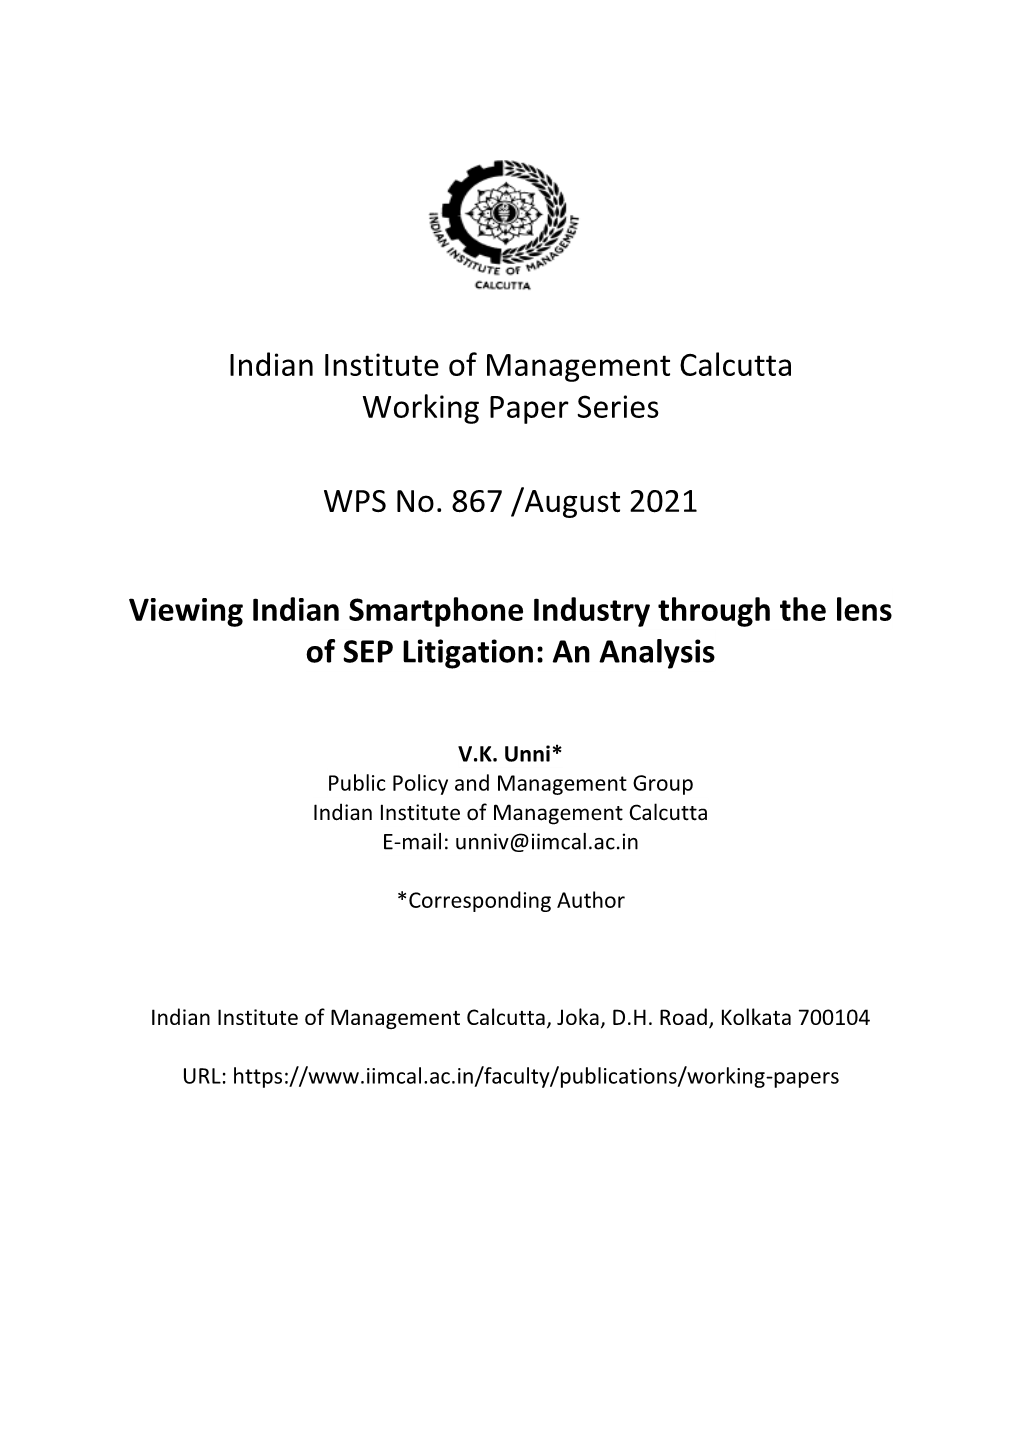 Viewing Indian Smartphone Industry Through the Lens of SEP Litigation: an Analysis